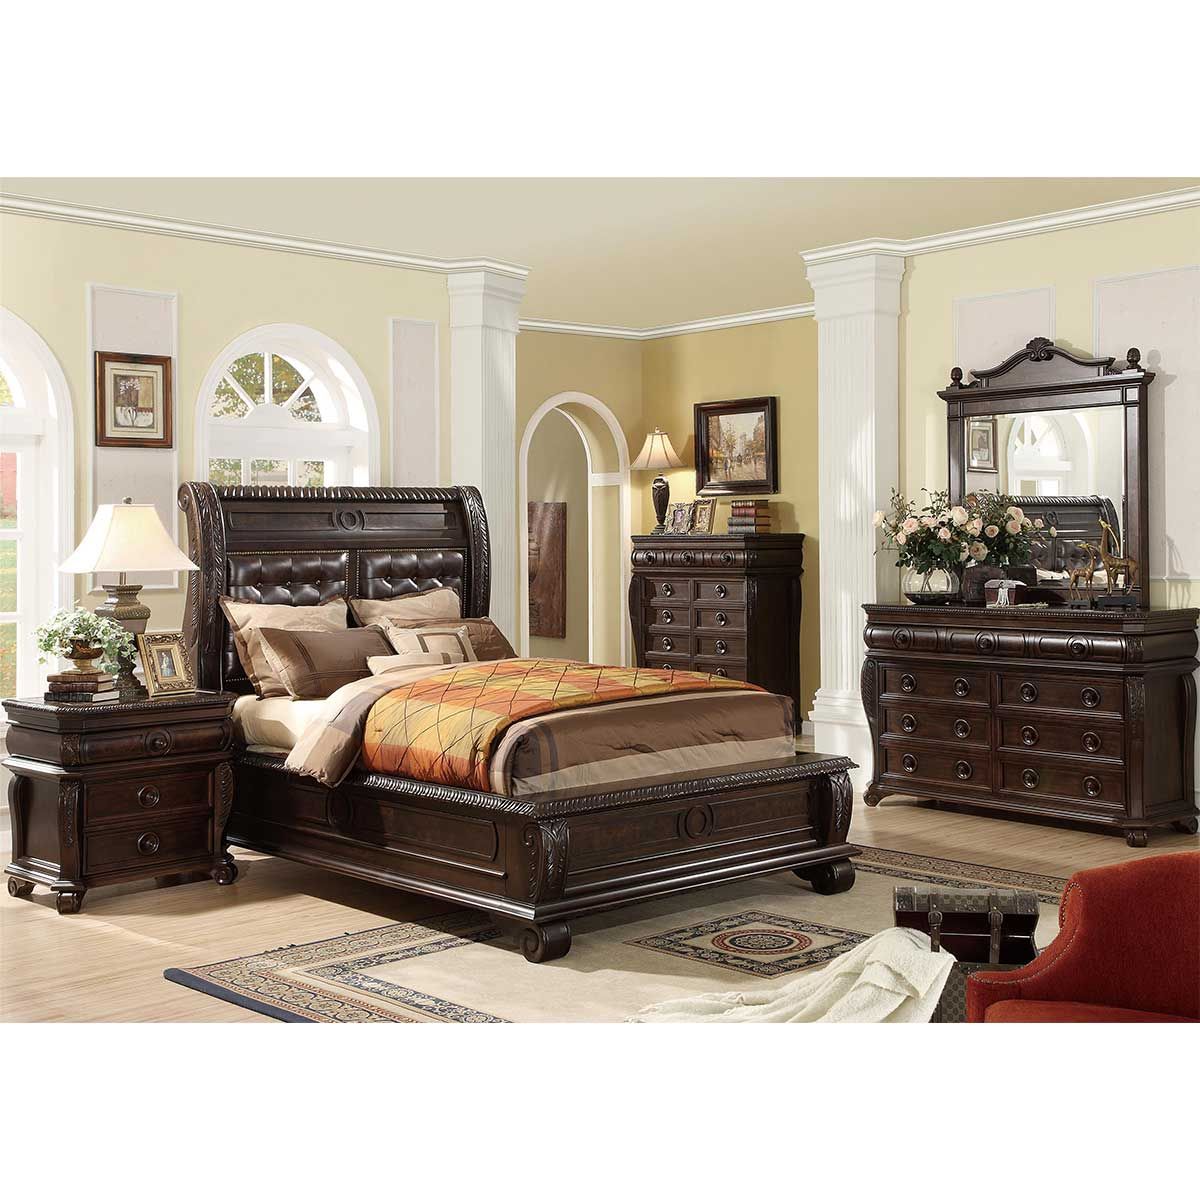 Home Insights New Hillsboro King Upholstered Bed lifestyle image